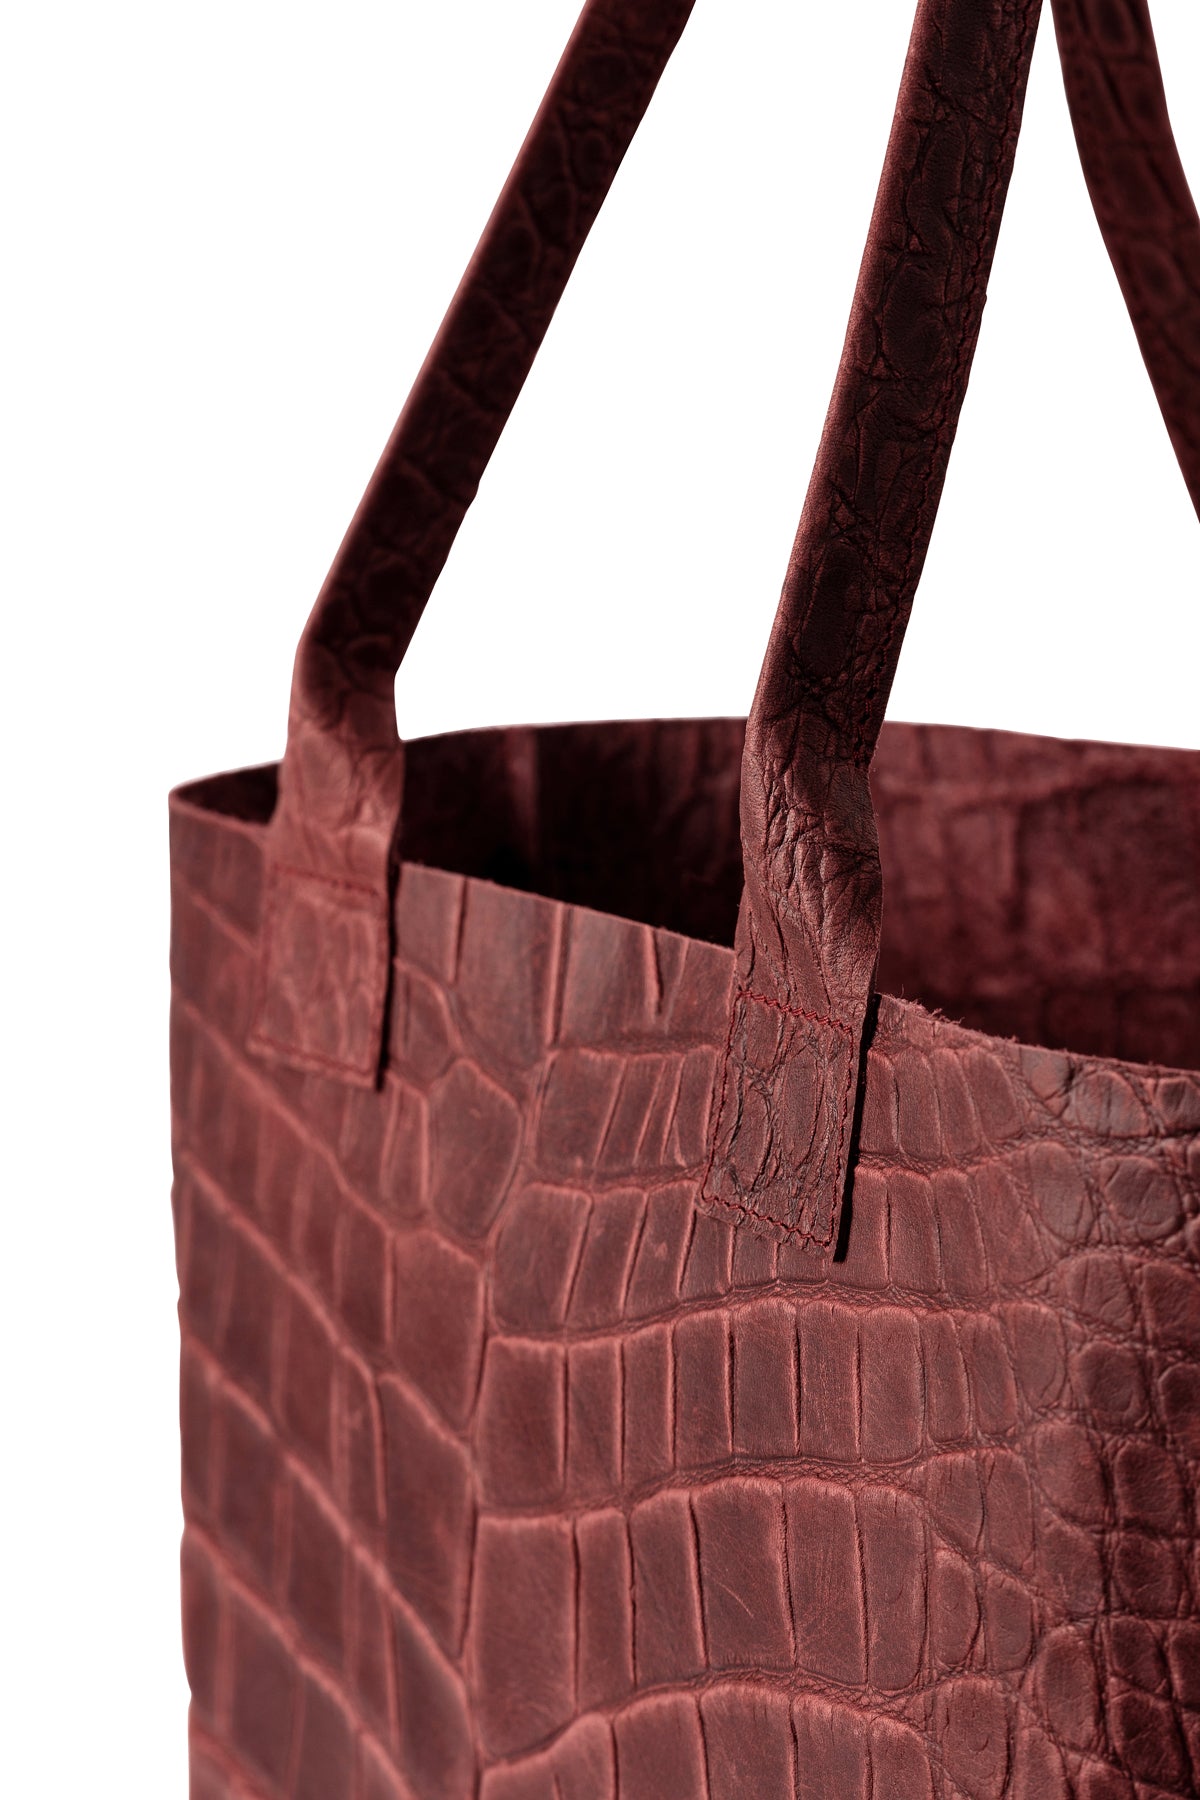 THE REVIVAL COLLECTION: Oversized Tote Bag